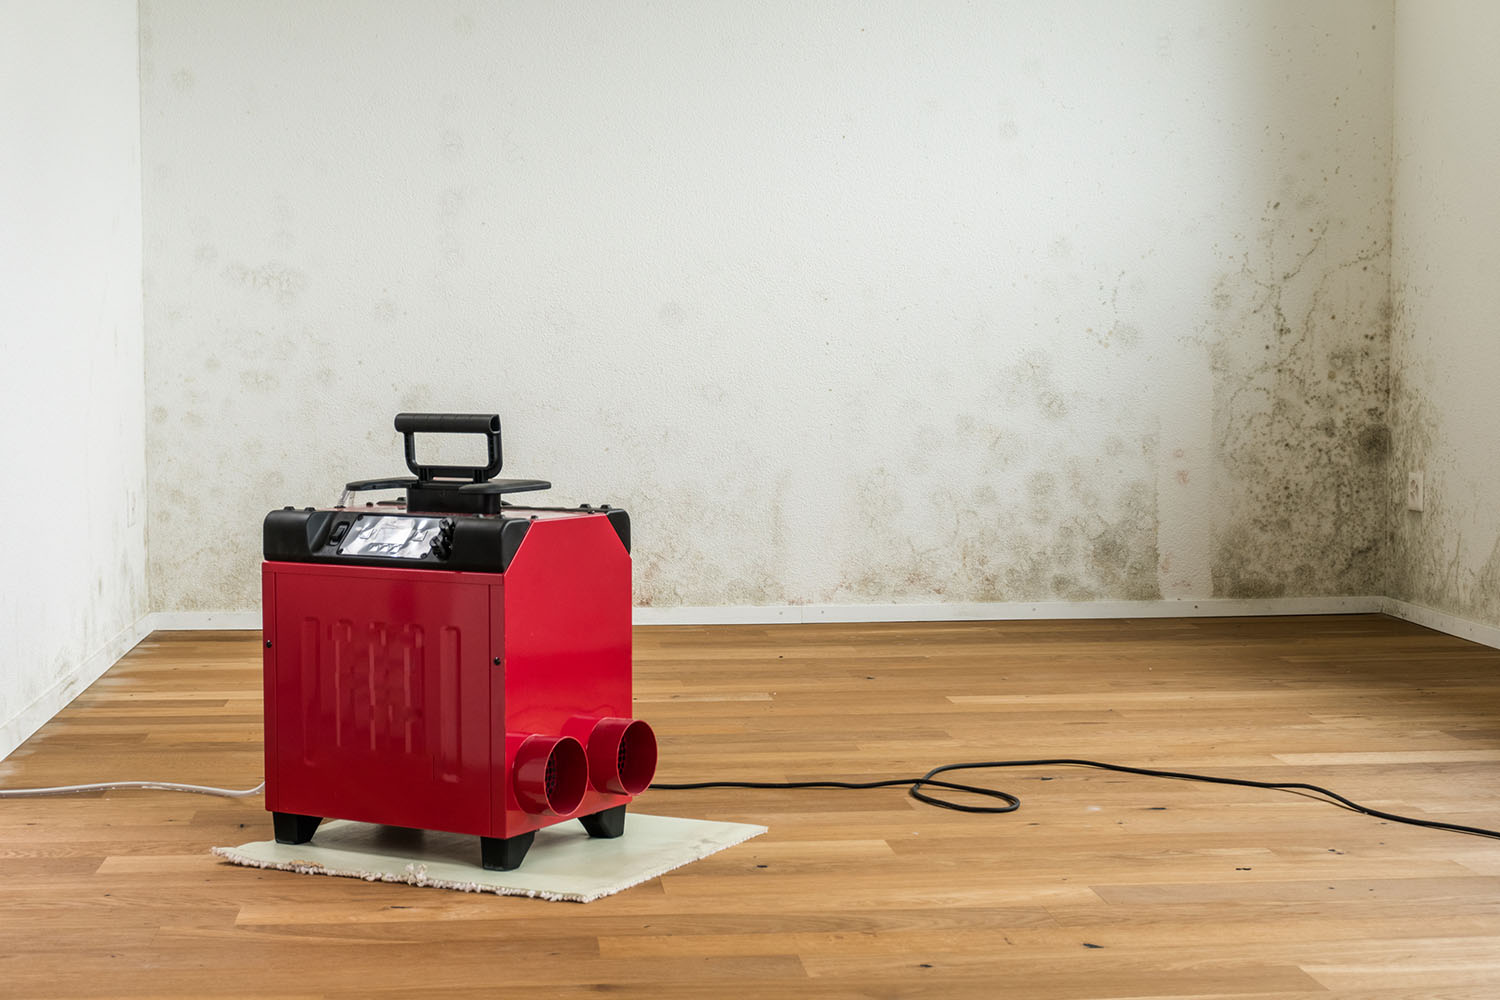 How To Drain Dehumidifier In Basement Without Drain